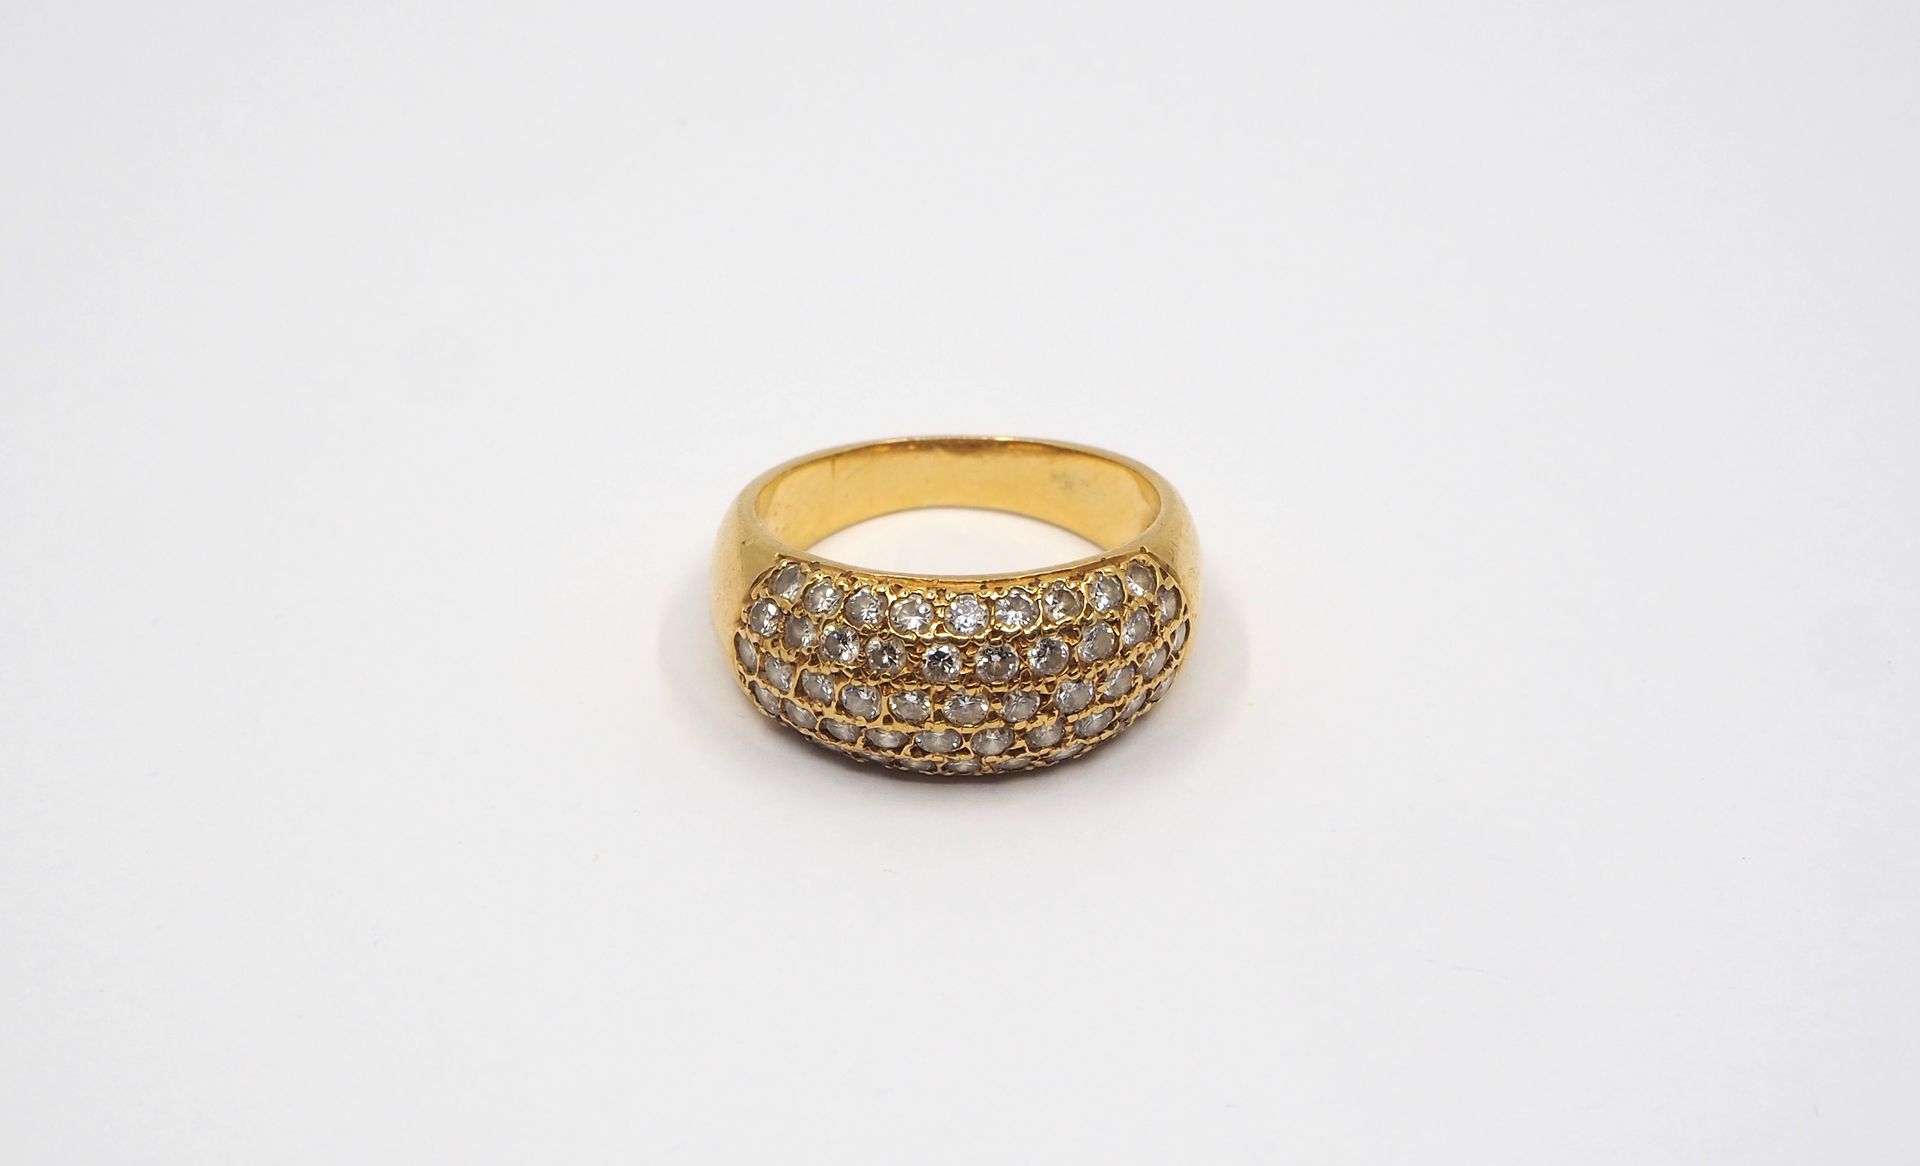 Null Yellow gold ring set with pavé-cut diamonds
Gross weight 5.21 grs